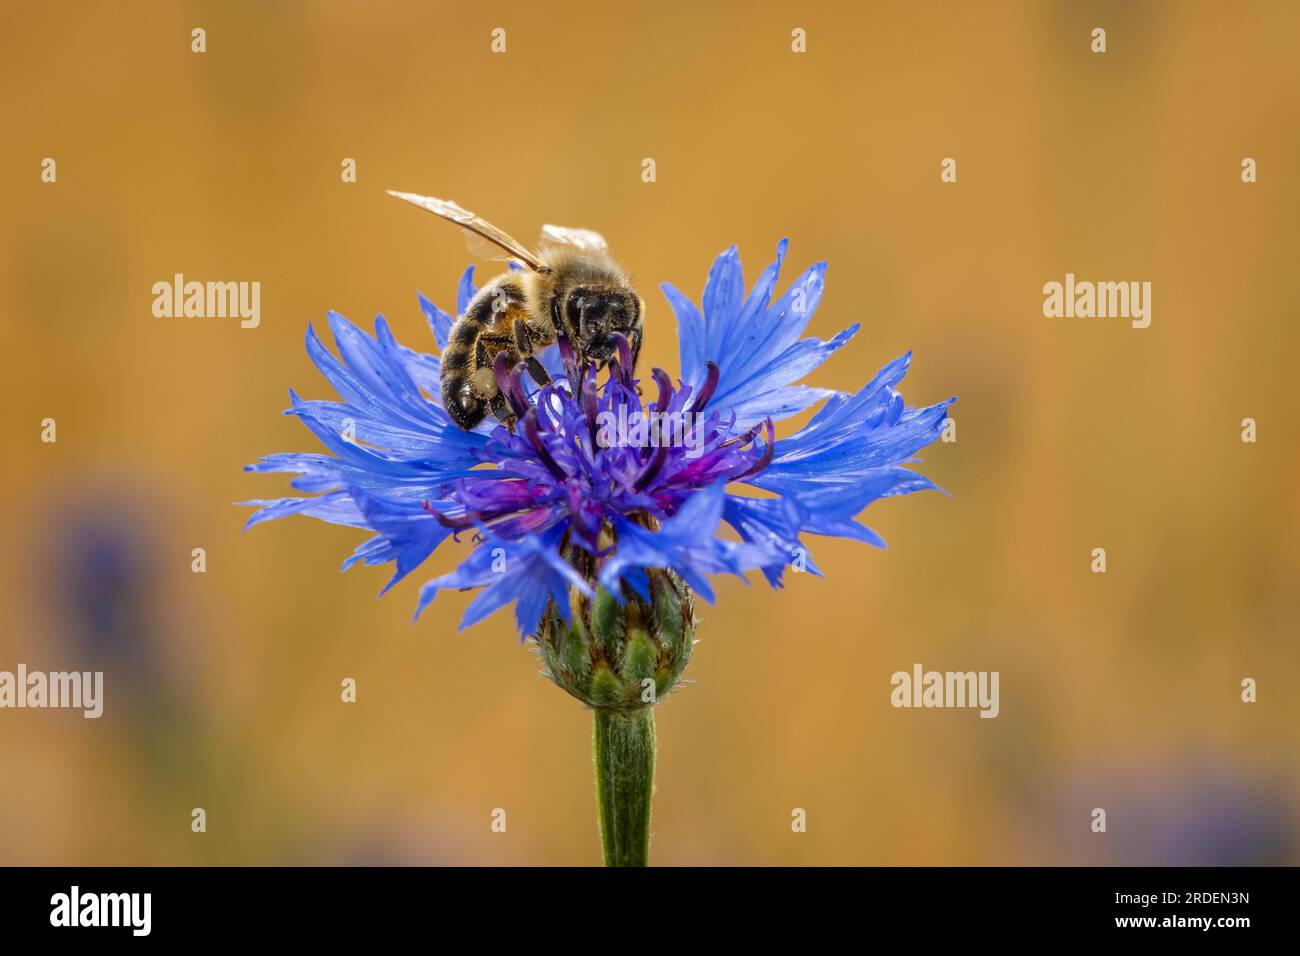 A bee sits on the blossom of a cornflower standing in a grain field near Frankfurt am Main, Germany, collecting pollen, Frankfurt am Main, Hesse Stock Photo